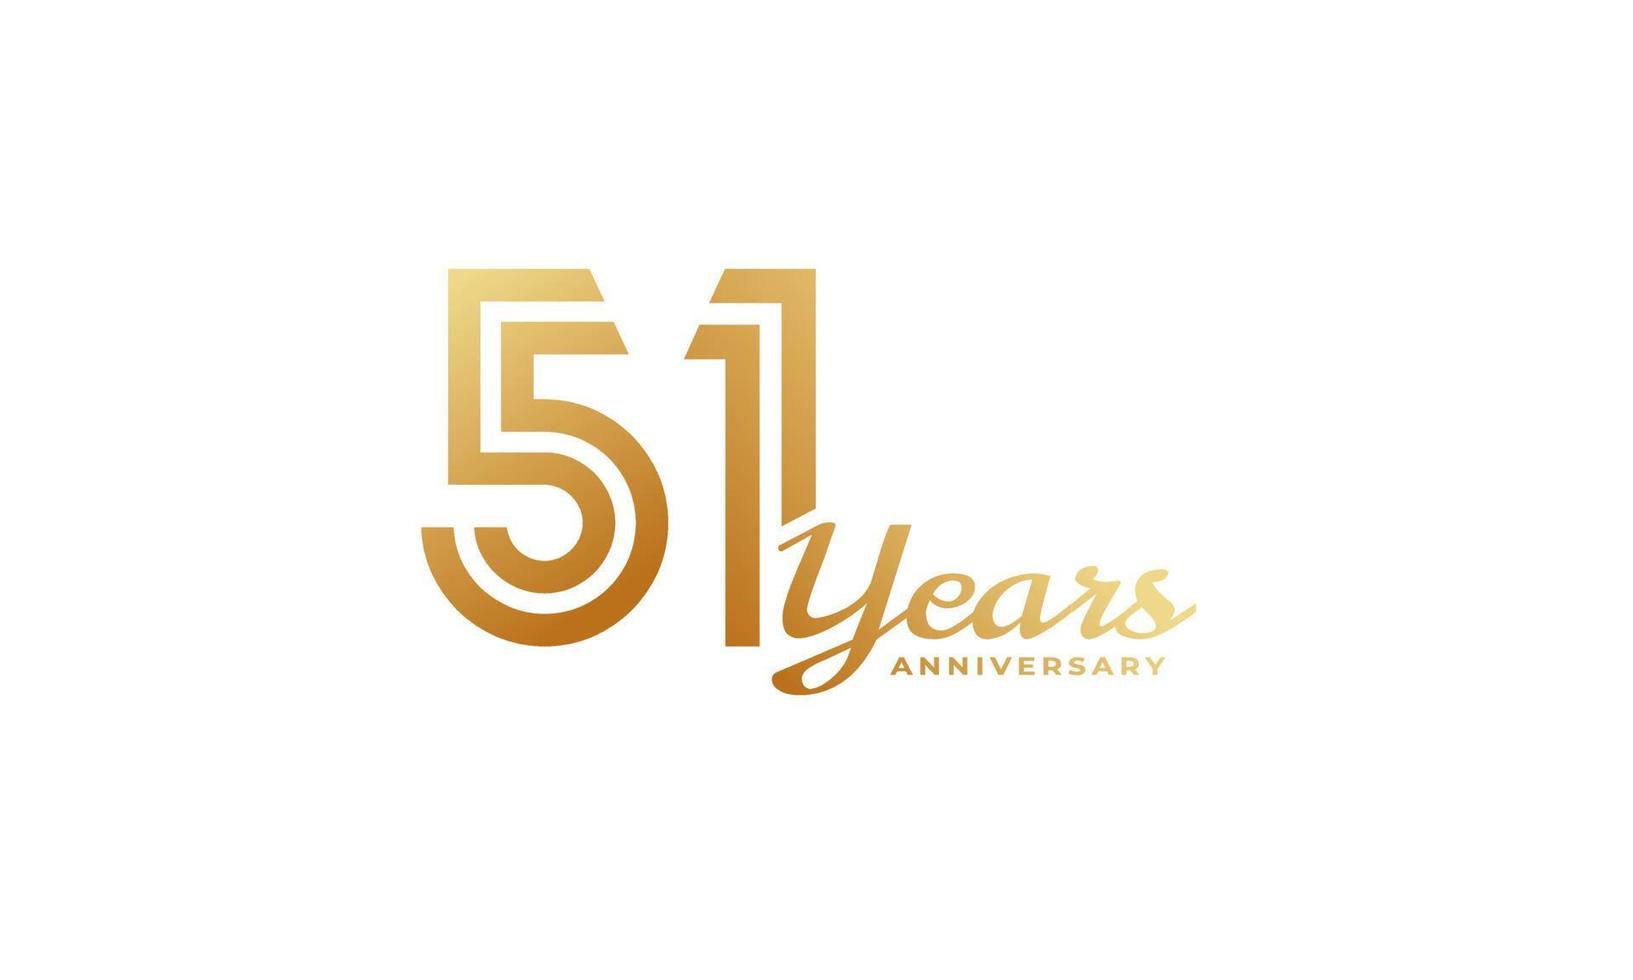 51 Year Anniversary Celebration with Handwriting Golden Color for Celebration Event, Wedding, Greeting card, and Invitation Isolated on White Background vector